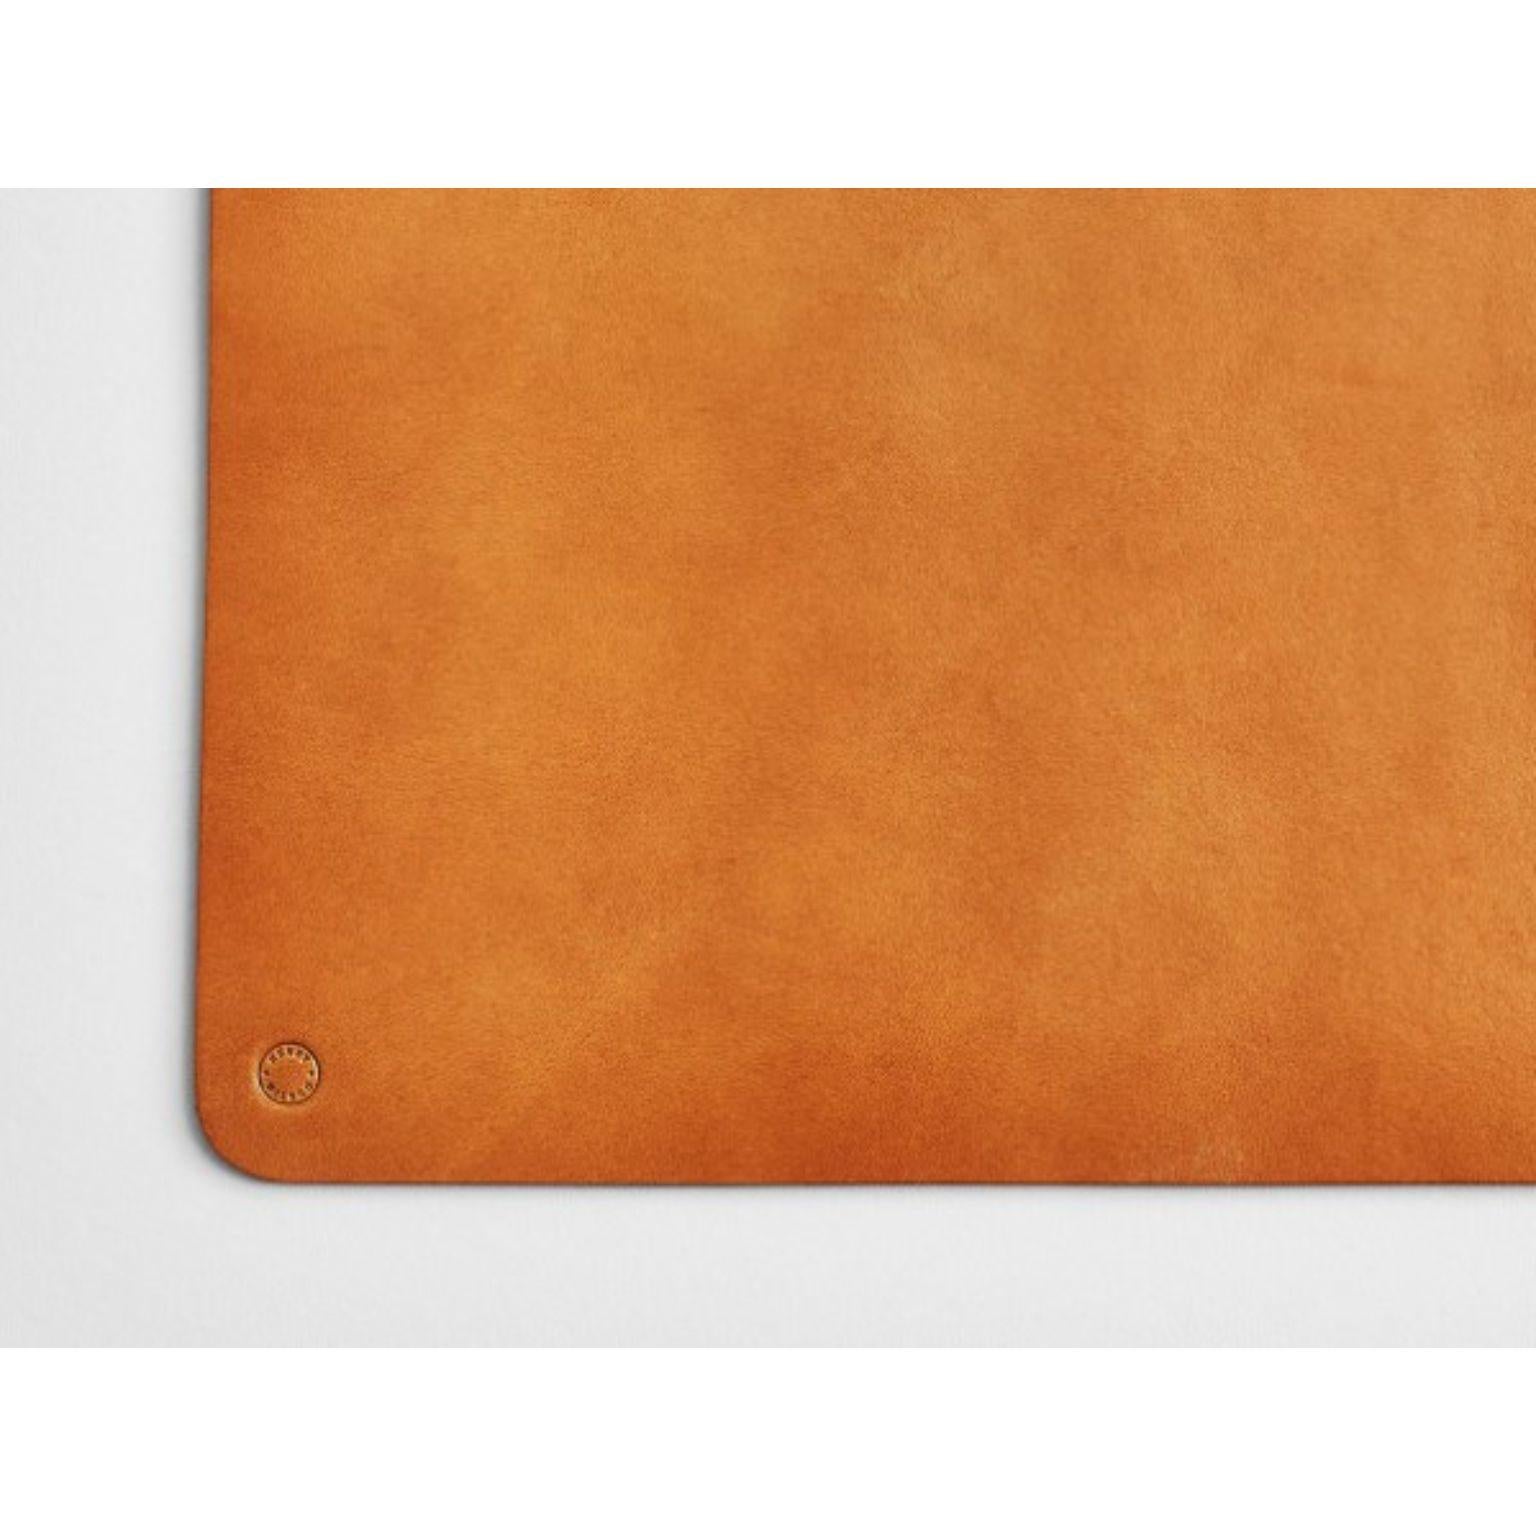 Leather Desk Mat Tan by Henry Wilson
Dimensions: D32 x H22
Materials: Leather

Our leather desk mats are made of vegetable tanned saddle leather imported from Italy. This type of leather is thick and durable, and its ‘half-dressed’ state